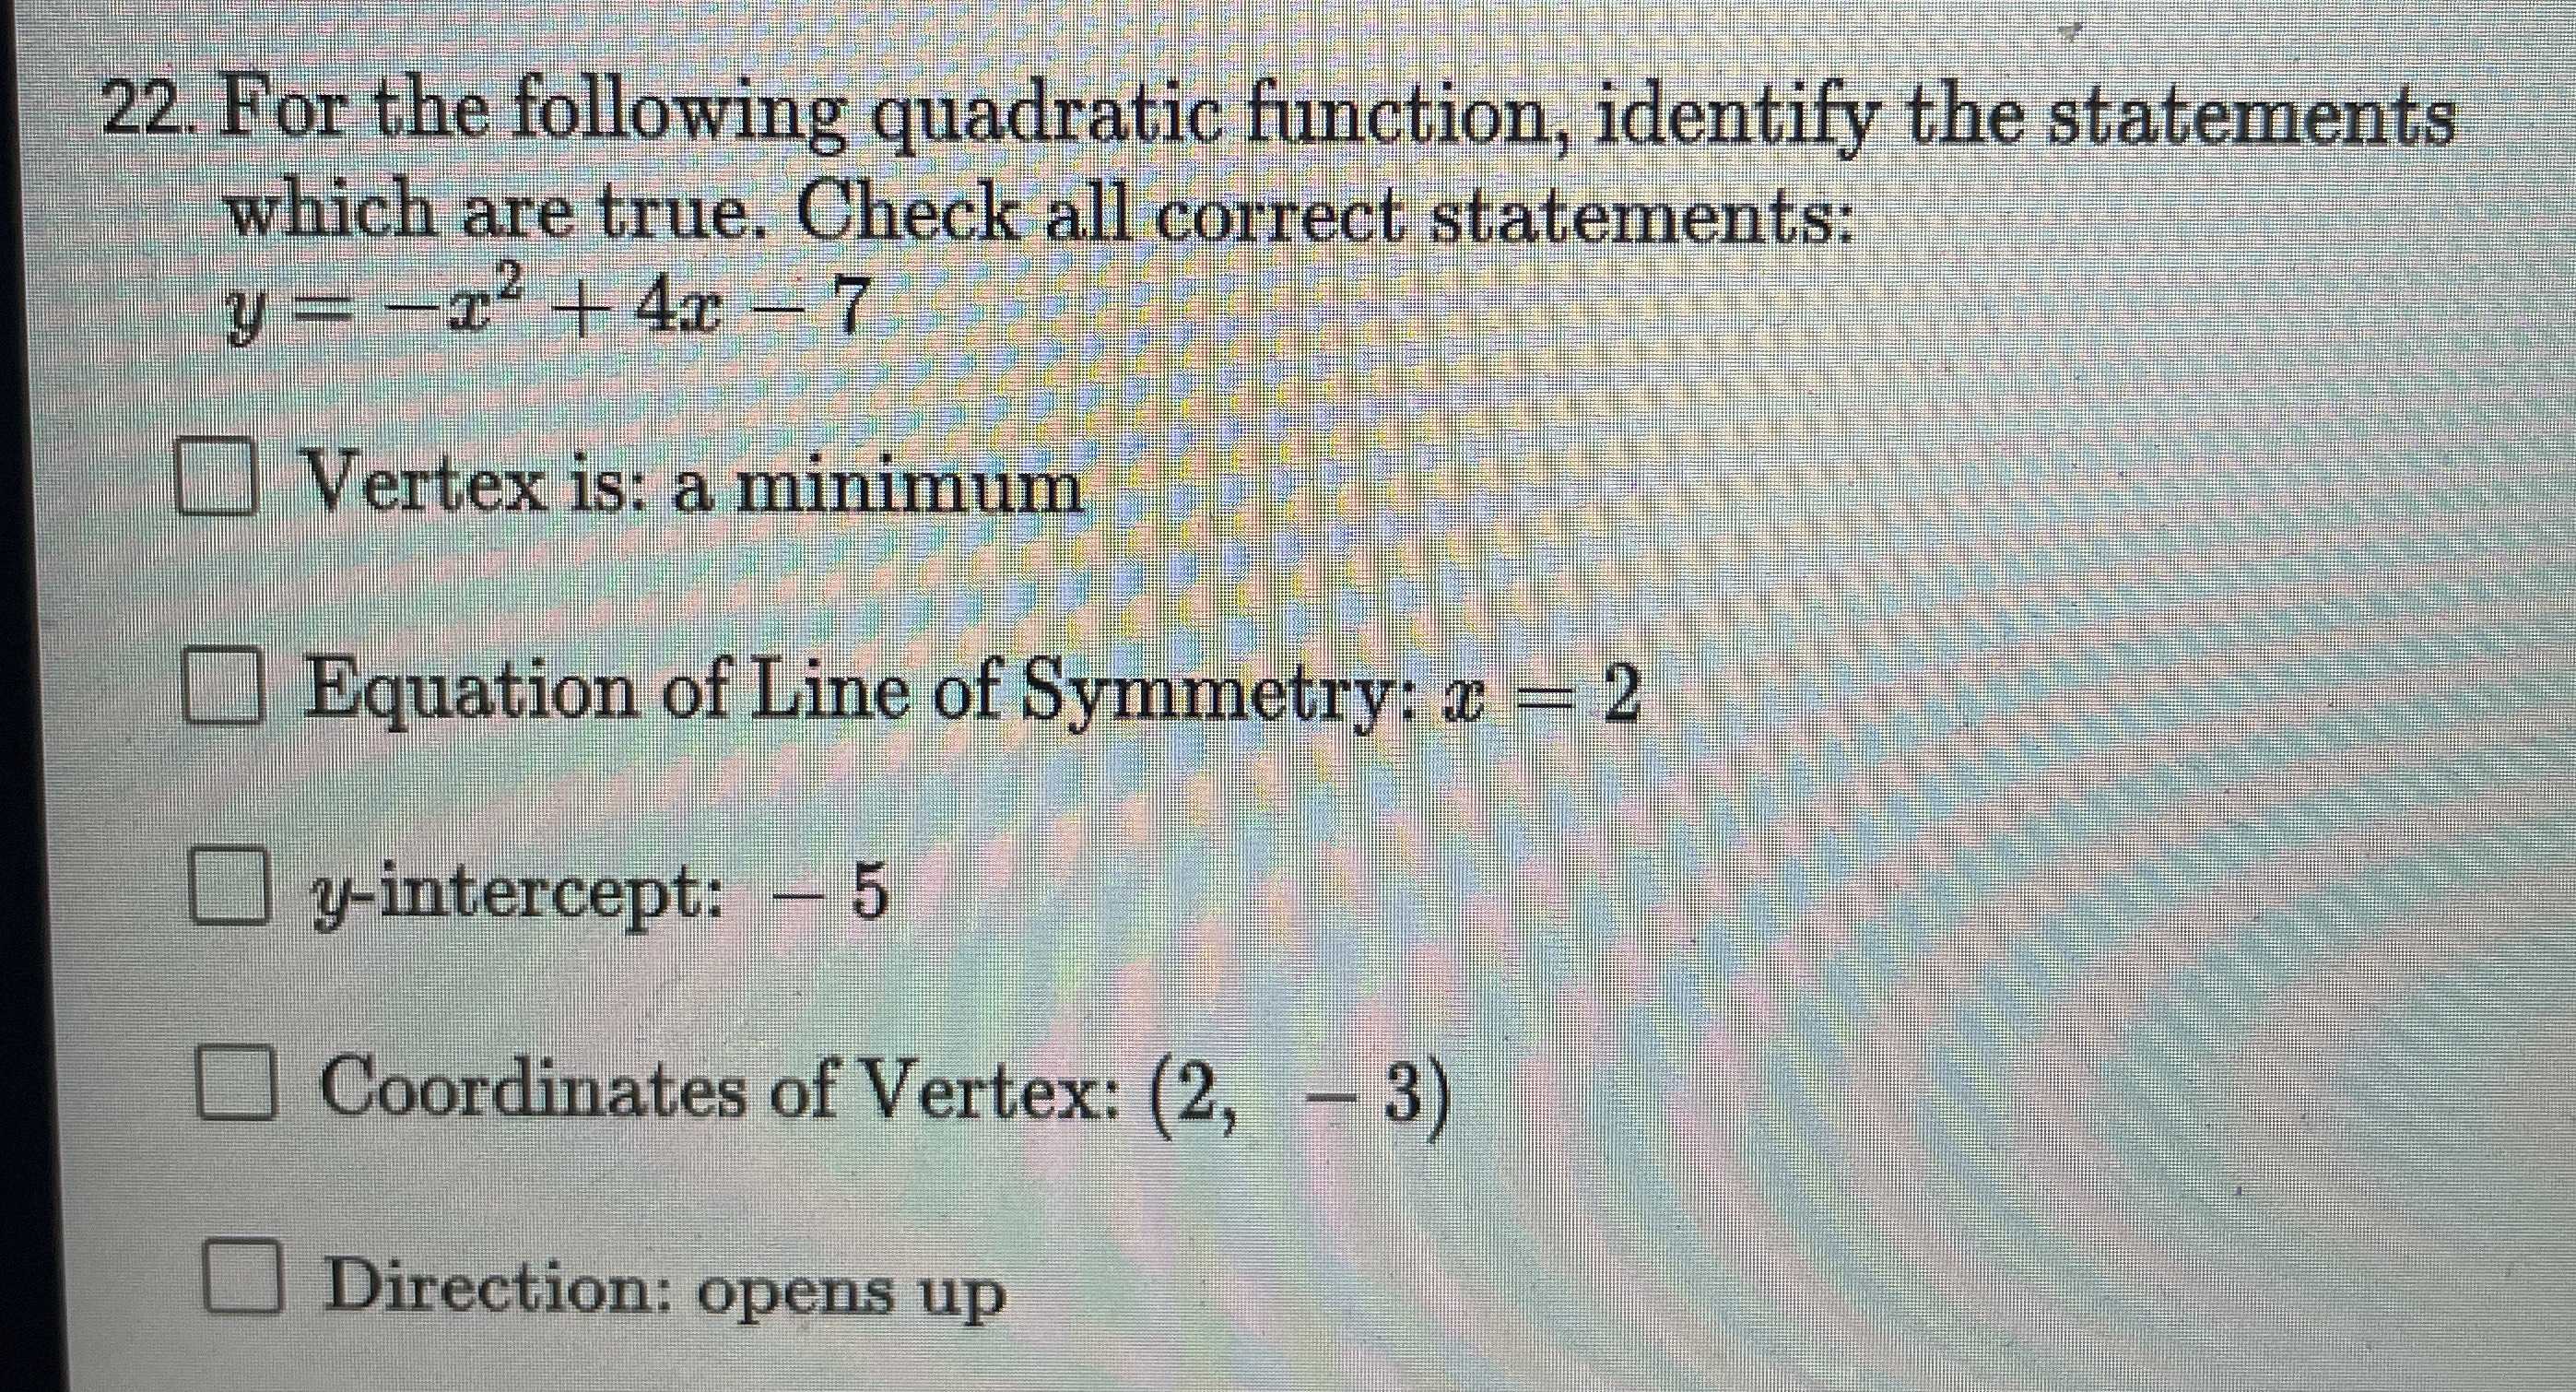 22. For the following quadratic function, identify...